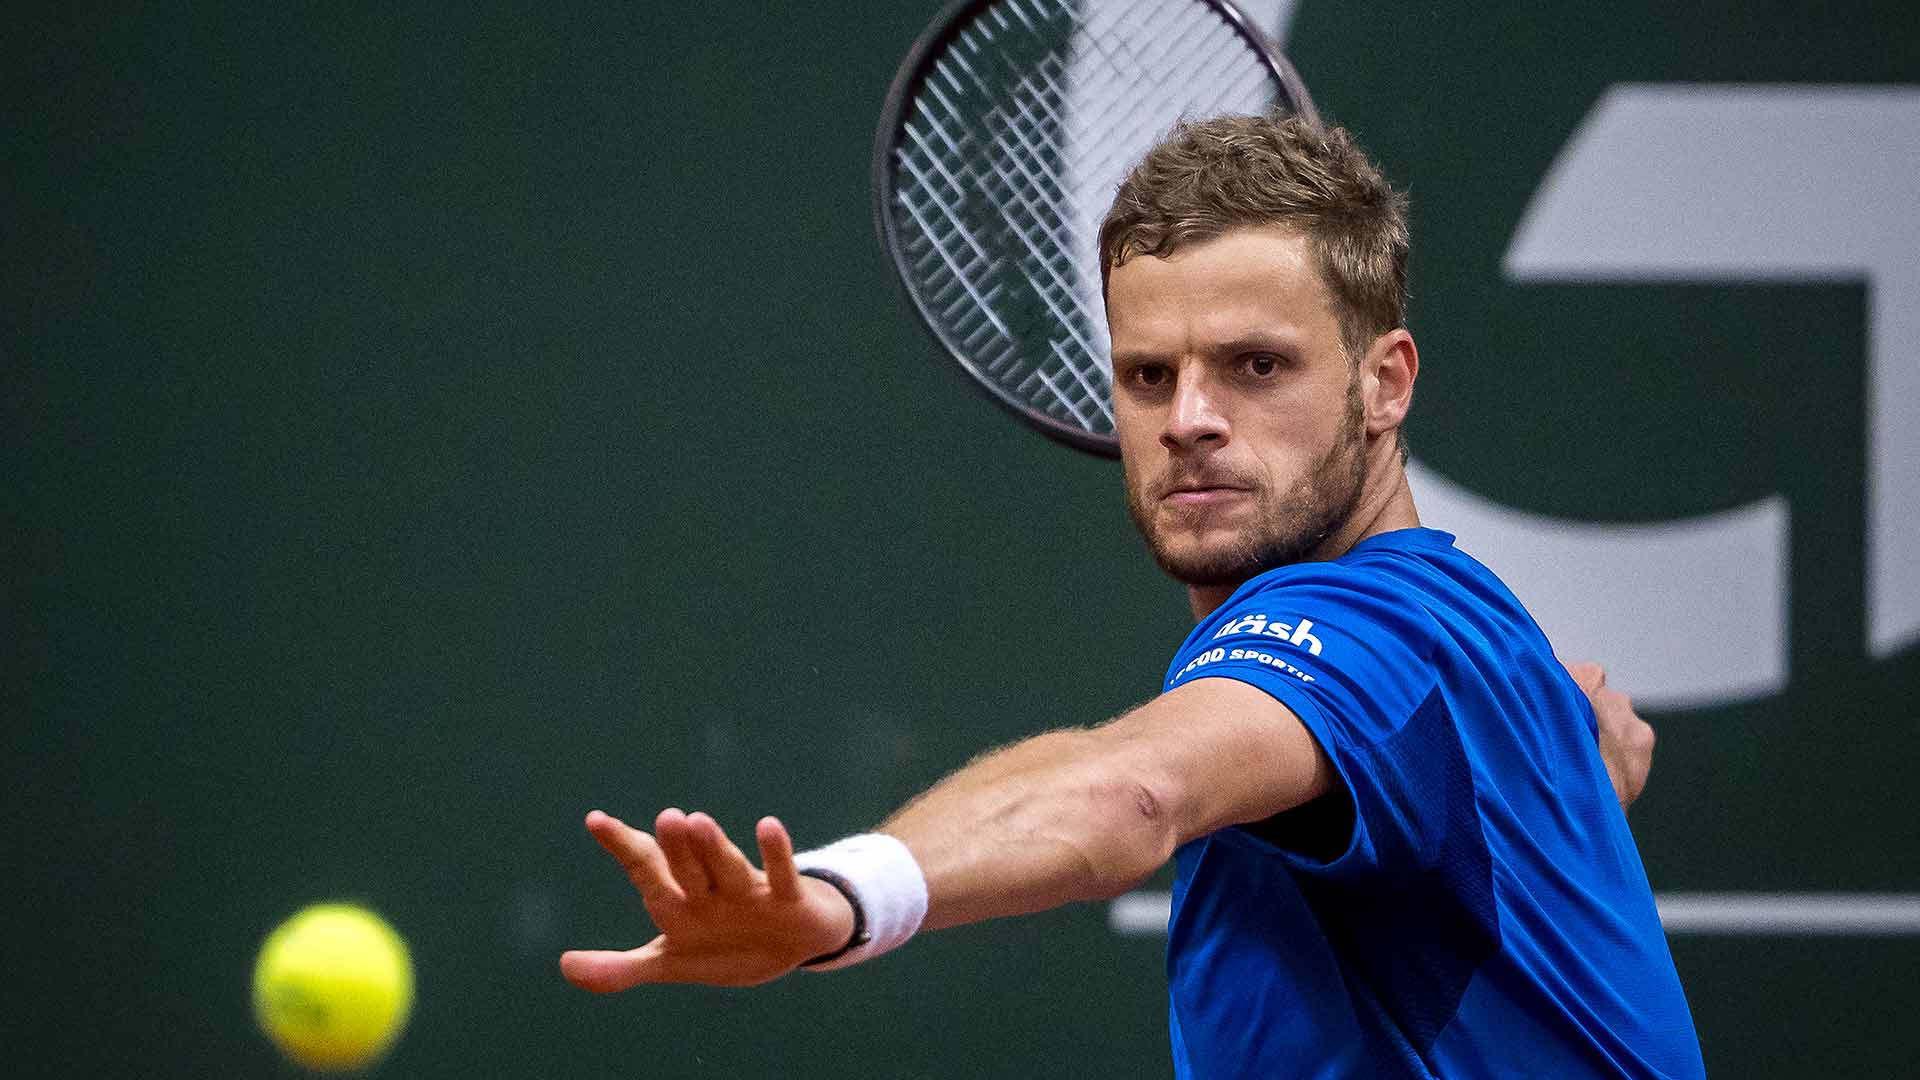 Hanfmann has Murray on the ropes, Djokovic in his sights